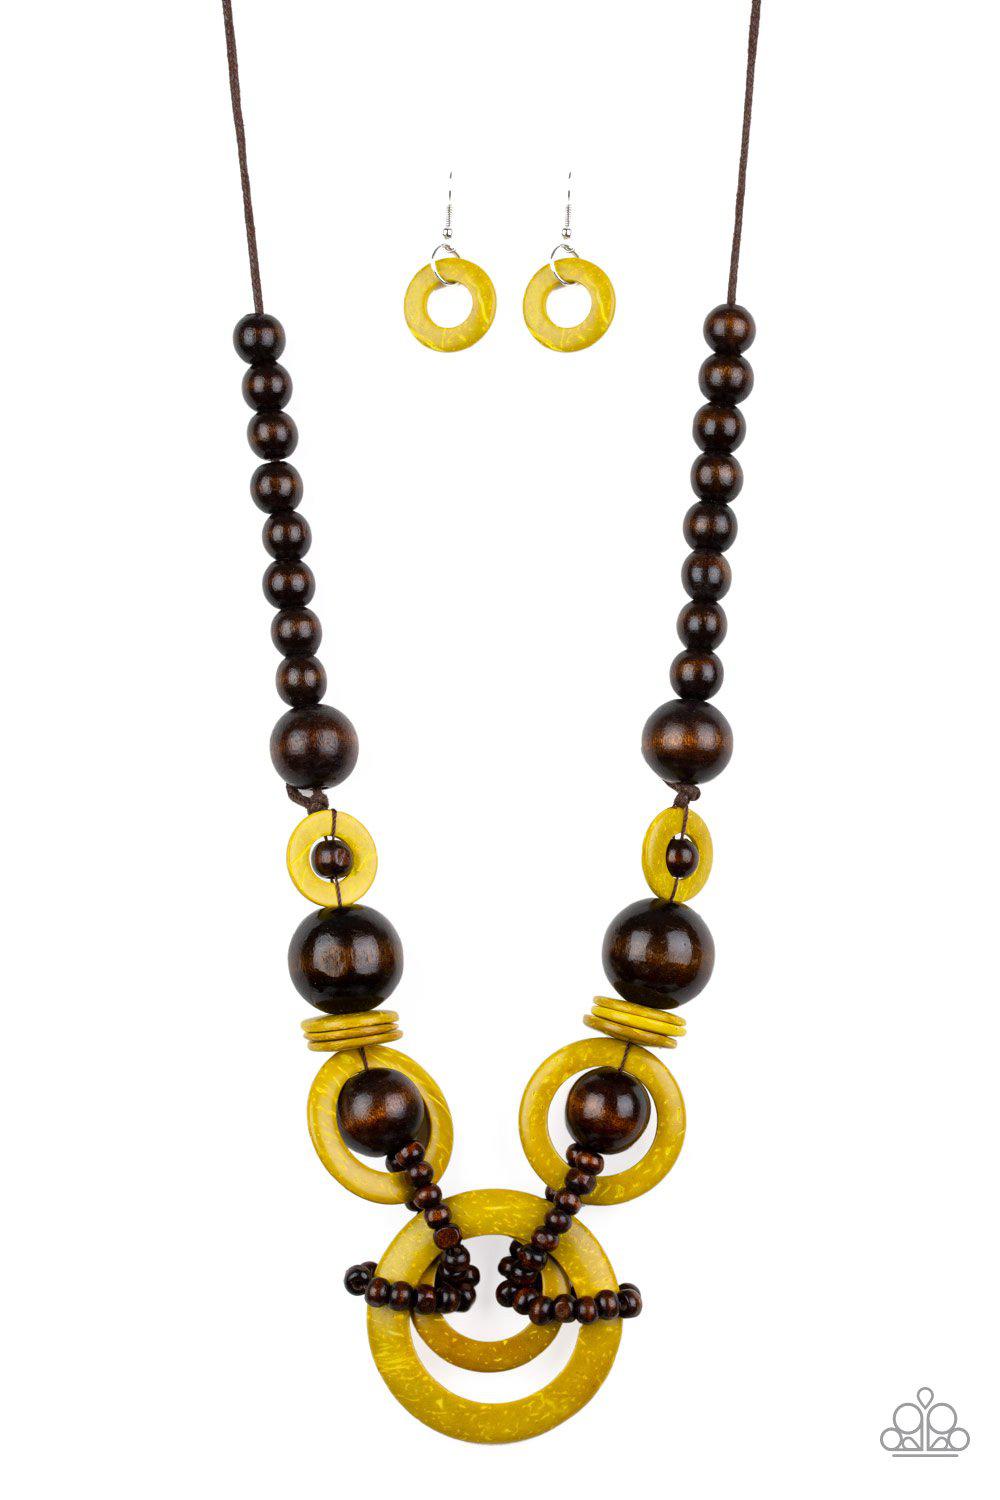 Boardwalk Party Yellow and Brown Wood Necklace - Paparazzi Accessories- lightbox - CarasShop.com - $5 Jewelry by Cara Jewels